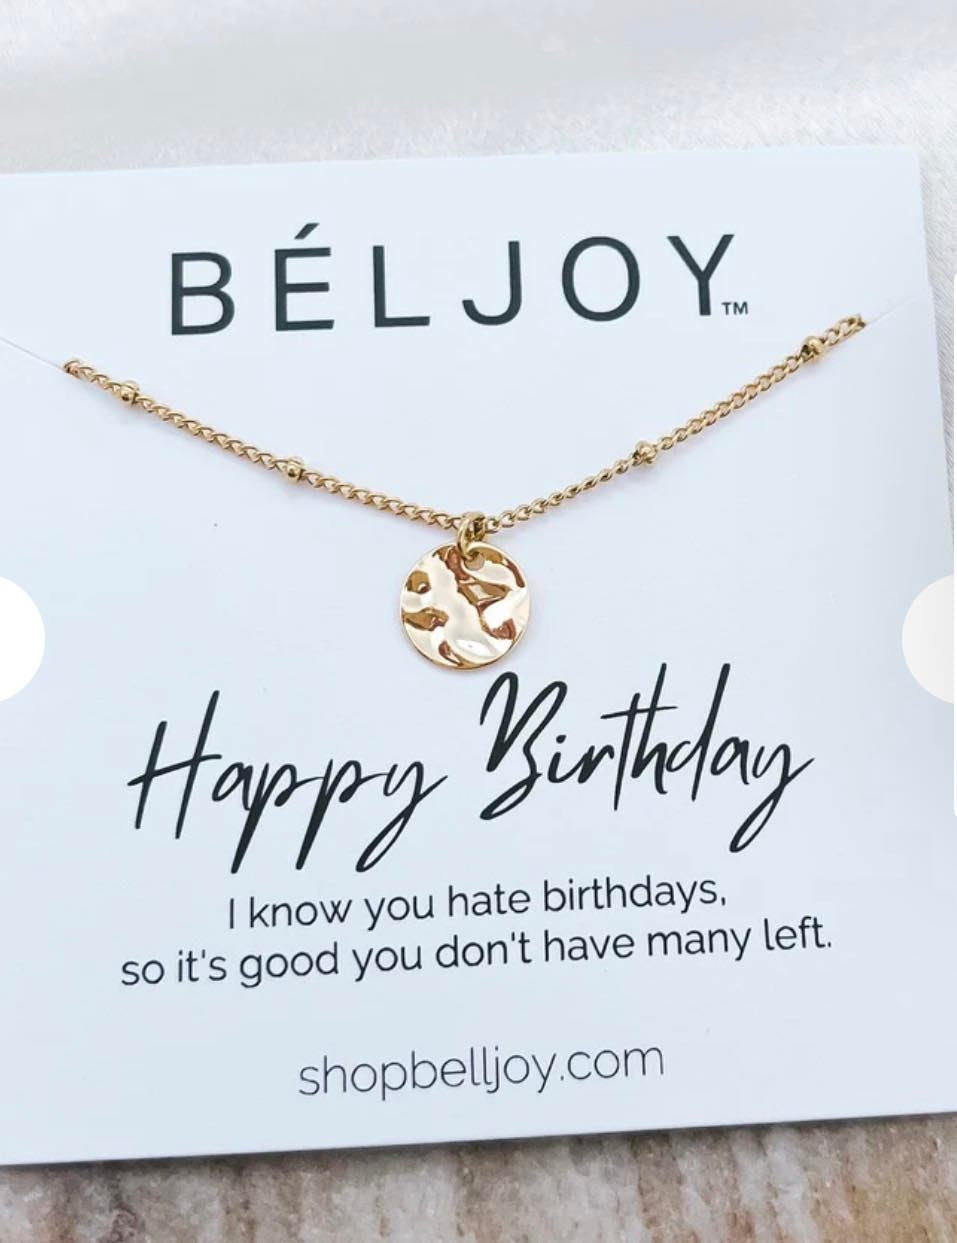 Happy birthday necklace from the gift collection